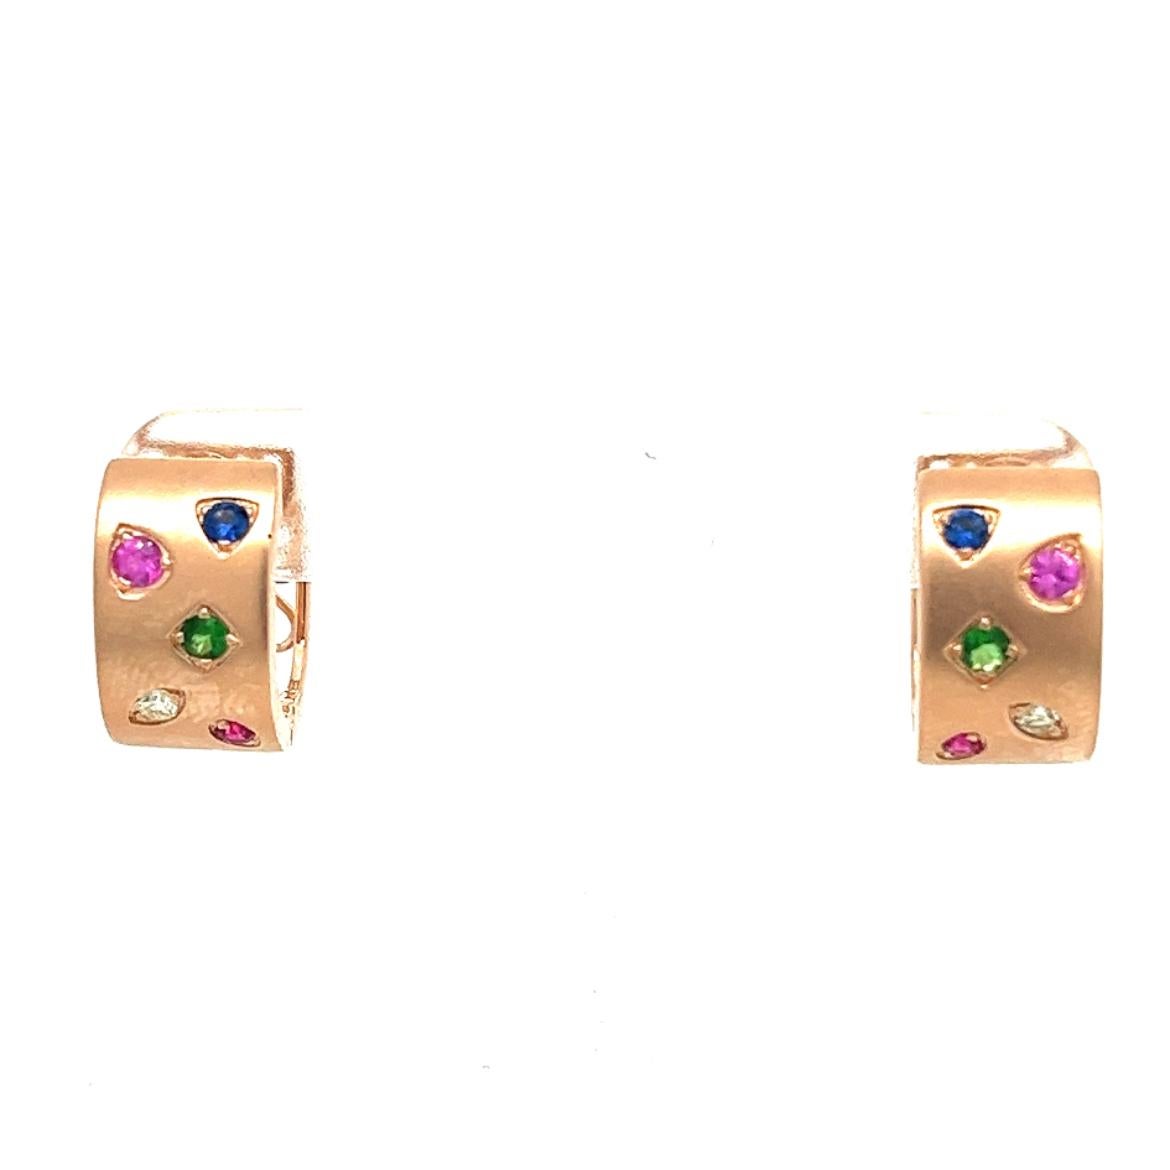 18K Rose Gold Earrings with Multi-Color Gemstones and Diamonds
2 Blue Sapphires - 0.08 CT
2 Diamonds - 0.05 CT
2 Green Garnets - 0.10 CT
2 Pink Sapphires - 0.11 CT
2 Rubies - 0.05 CT
18K Rose Gold - 6.36 GM
The artisans and designers at Althoff